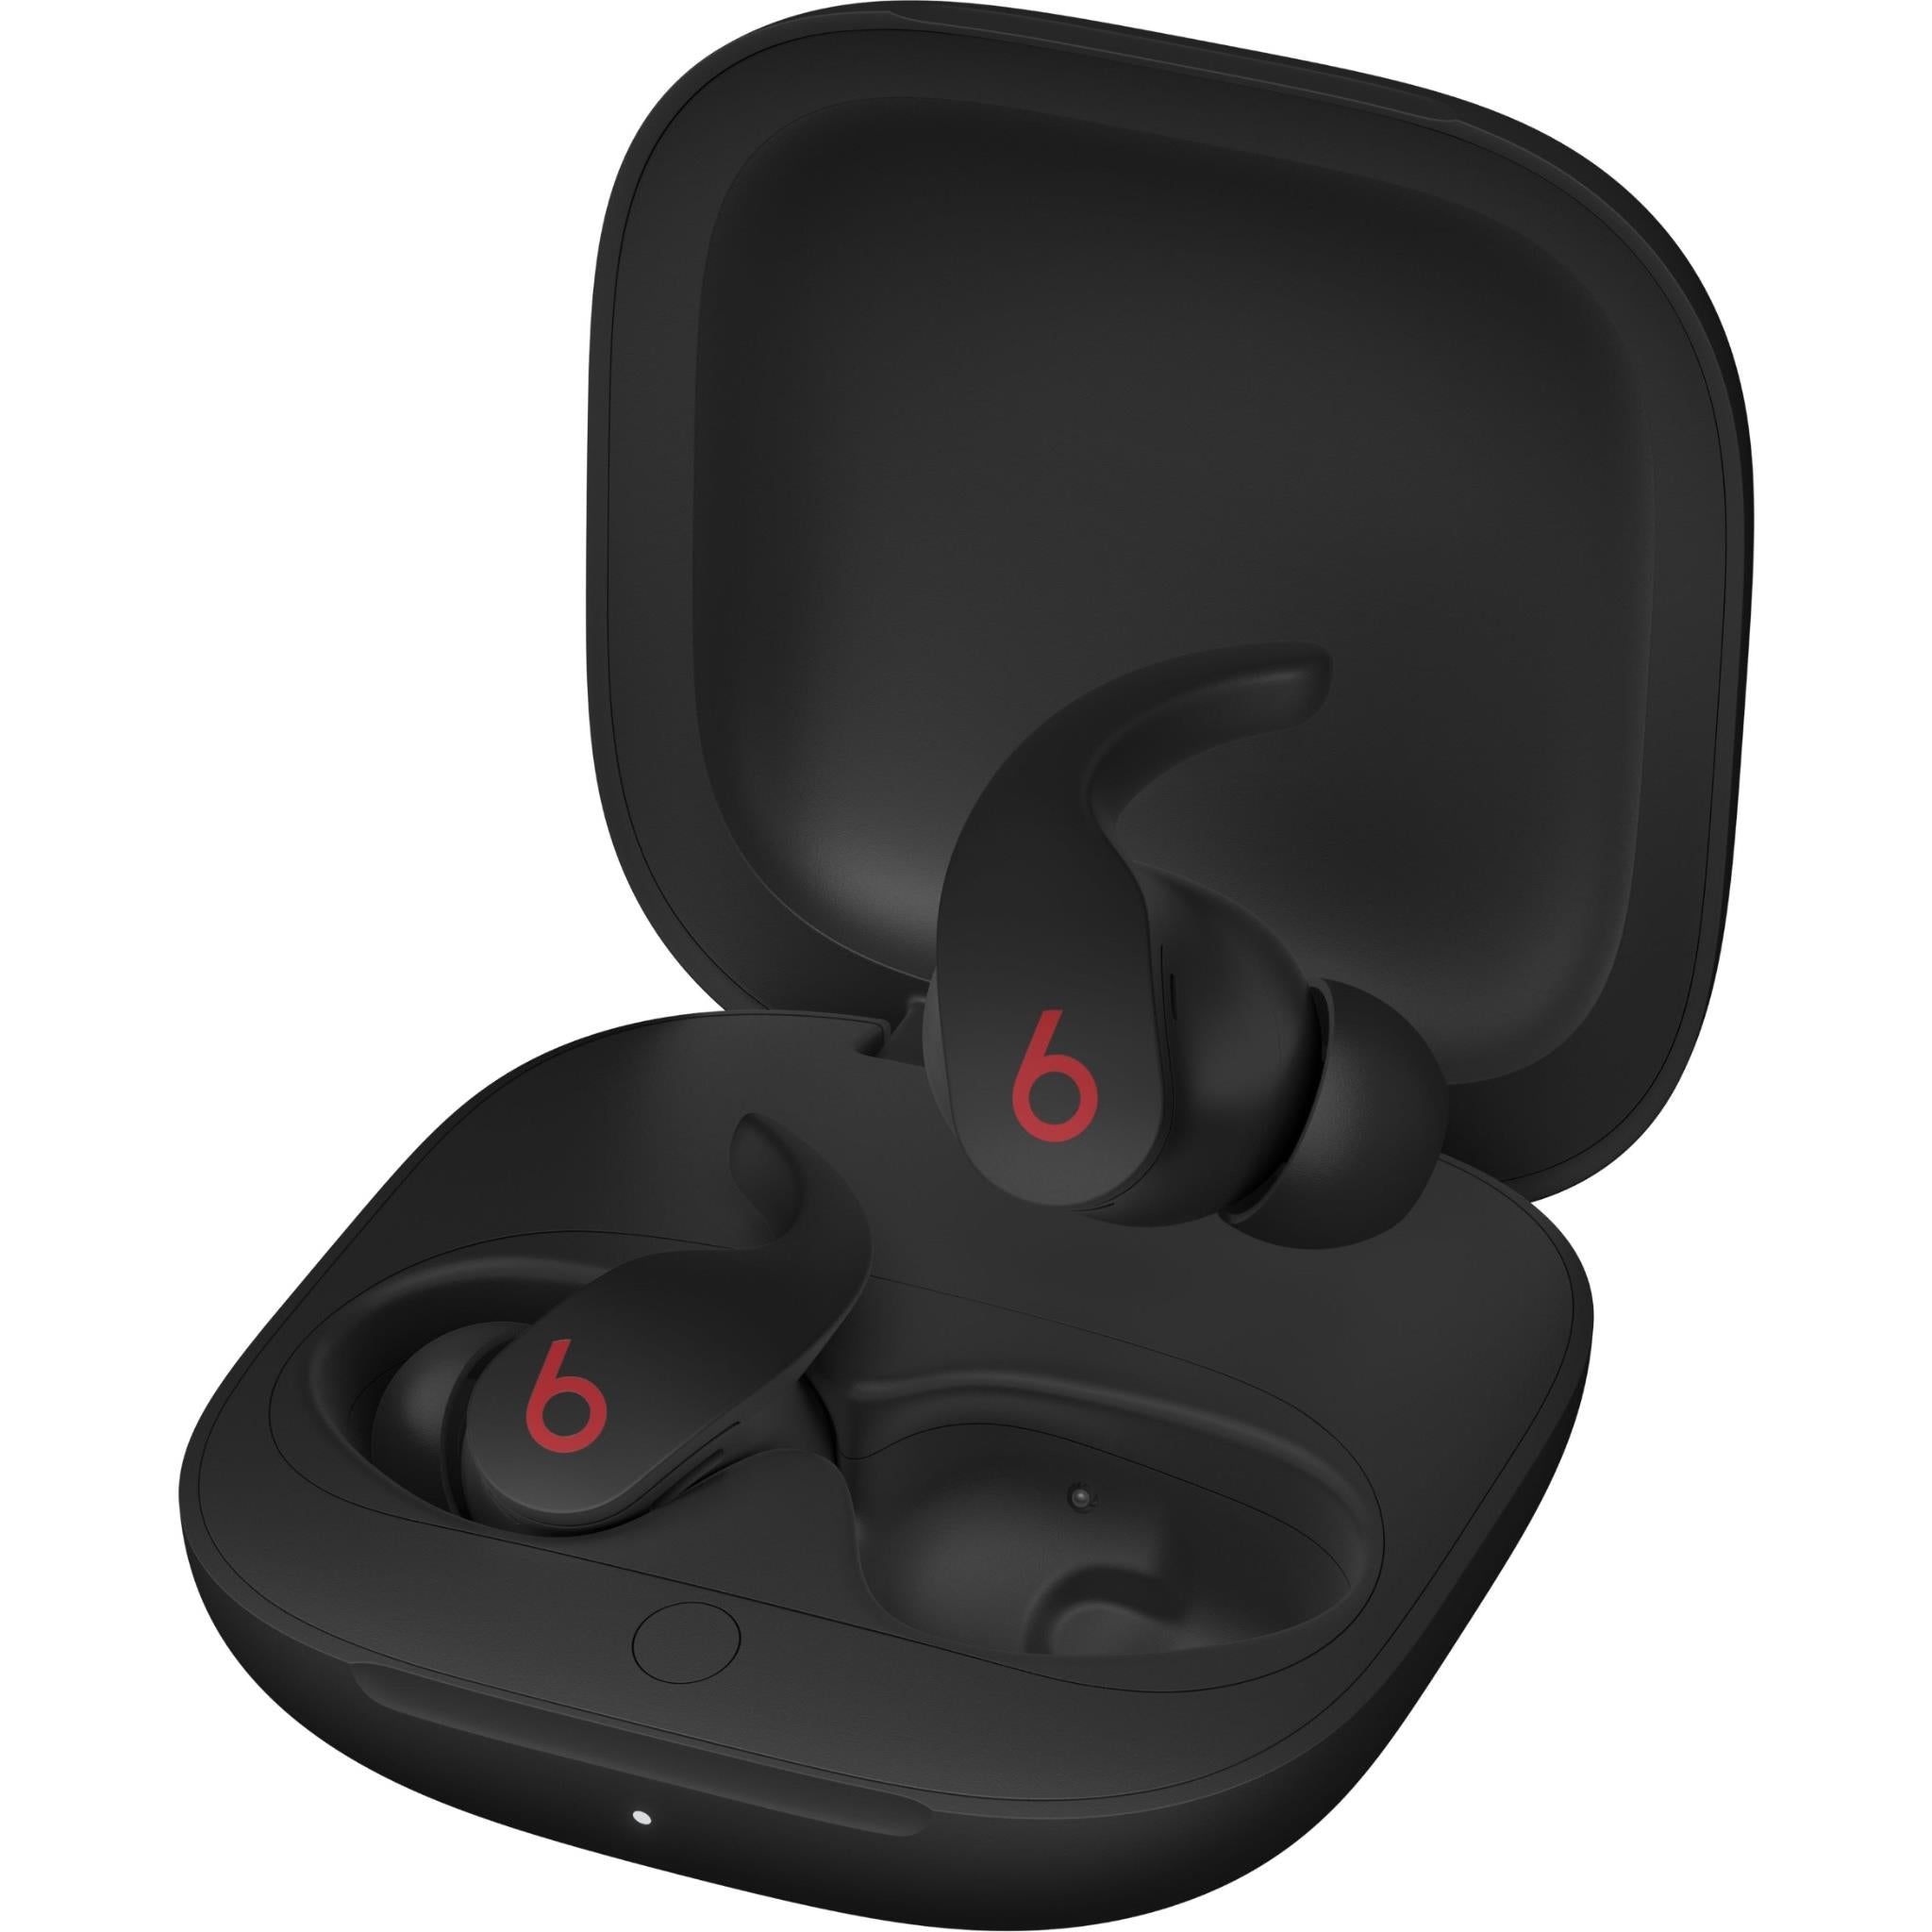 APPLE IS GIVING THESE AWAY! New Beats Flex All Day Stereo Bluetooth Earbuds  Short Review & UnBoxing 